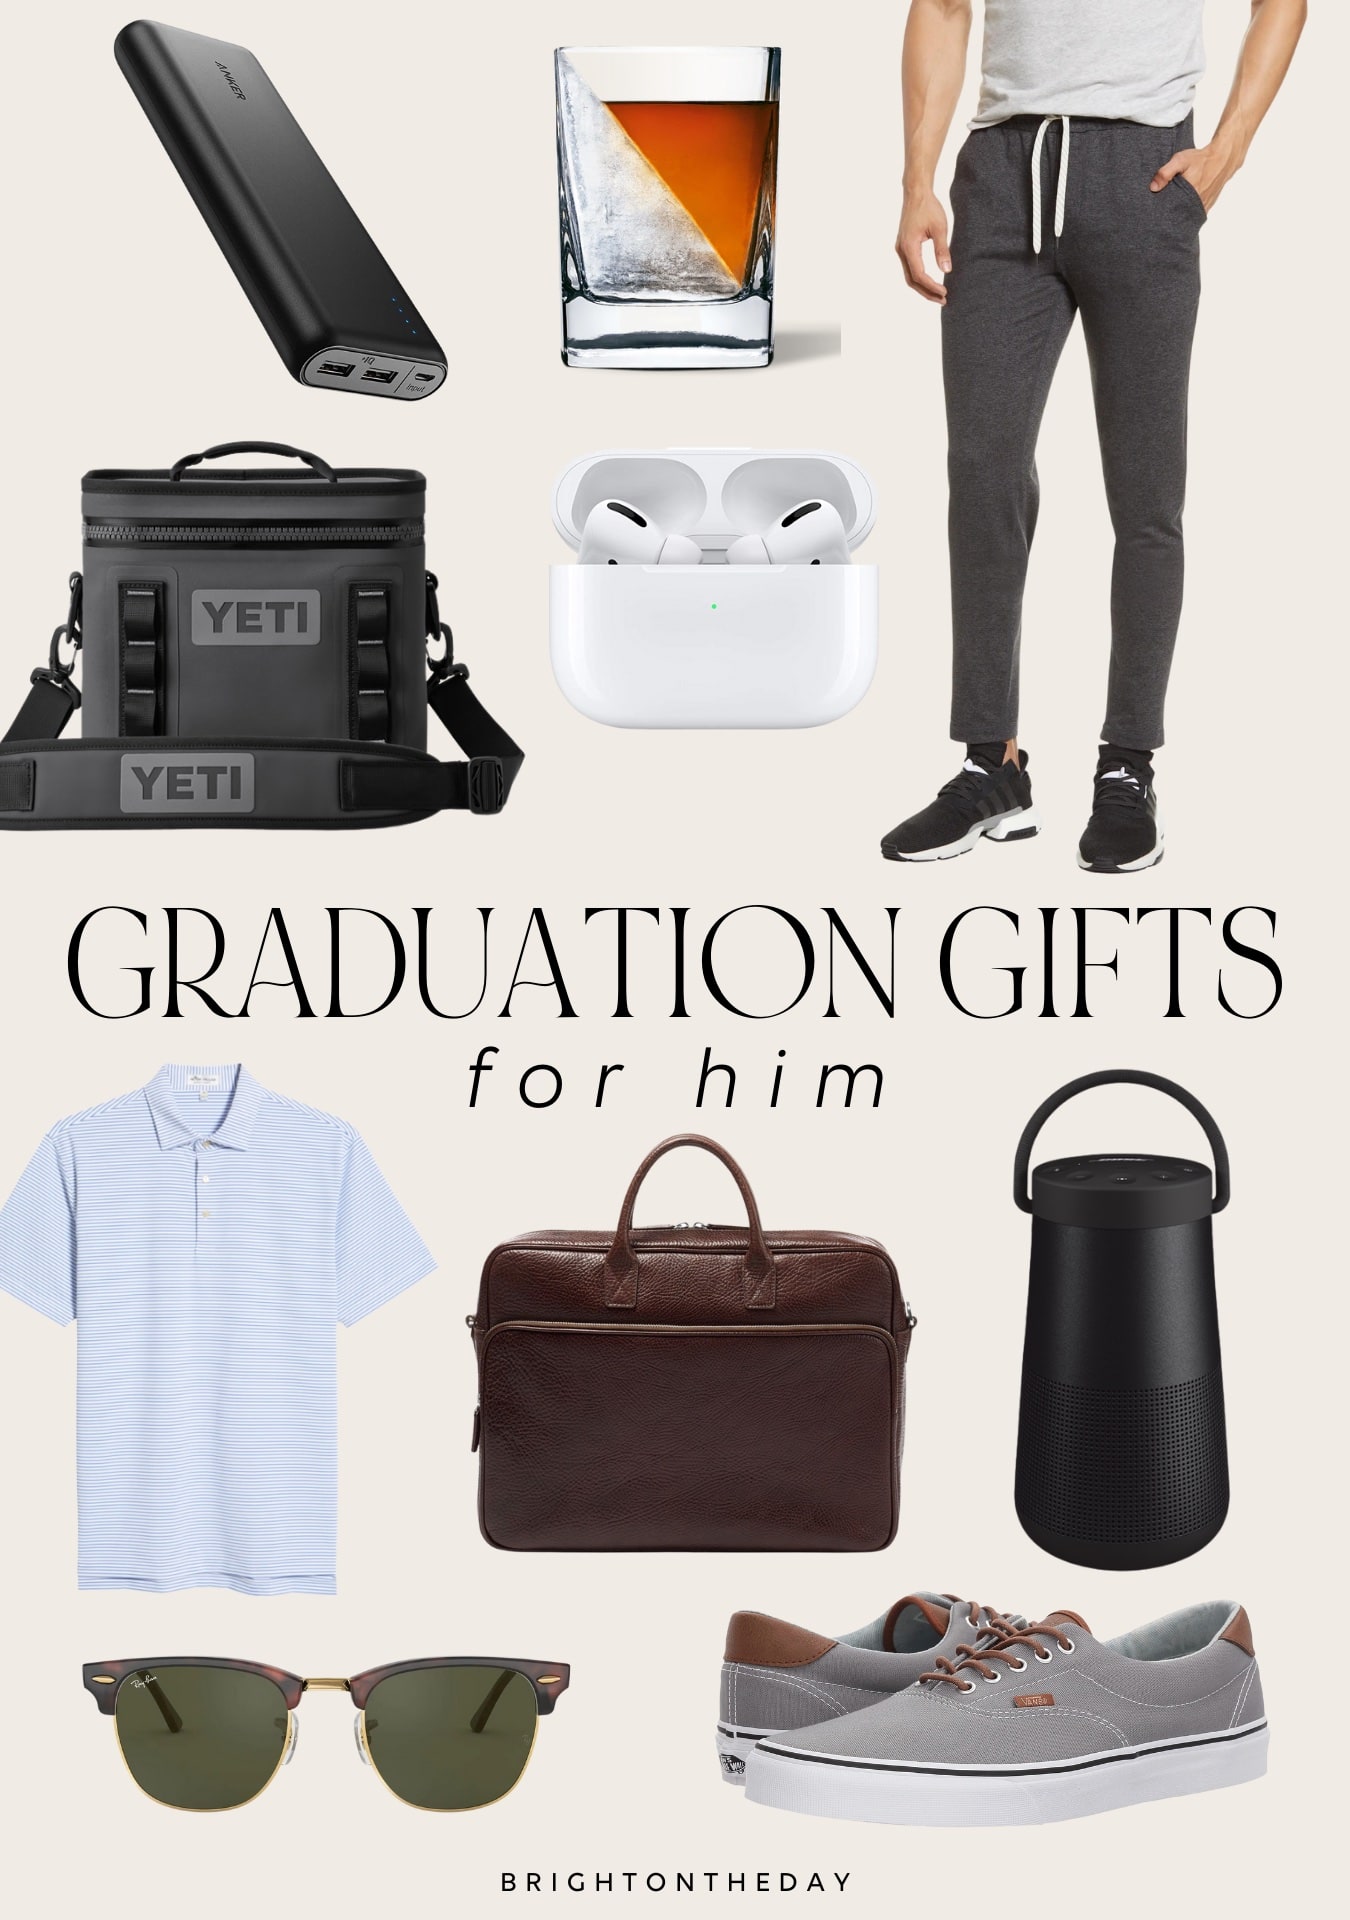 Brighton Butler Graduation Gifts for him